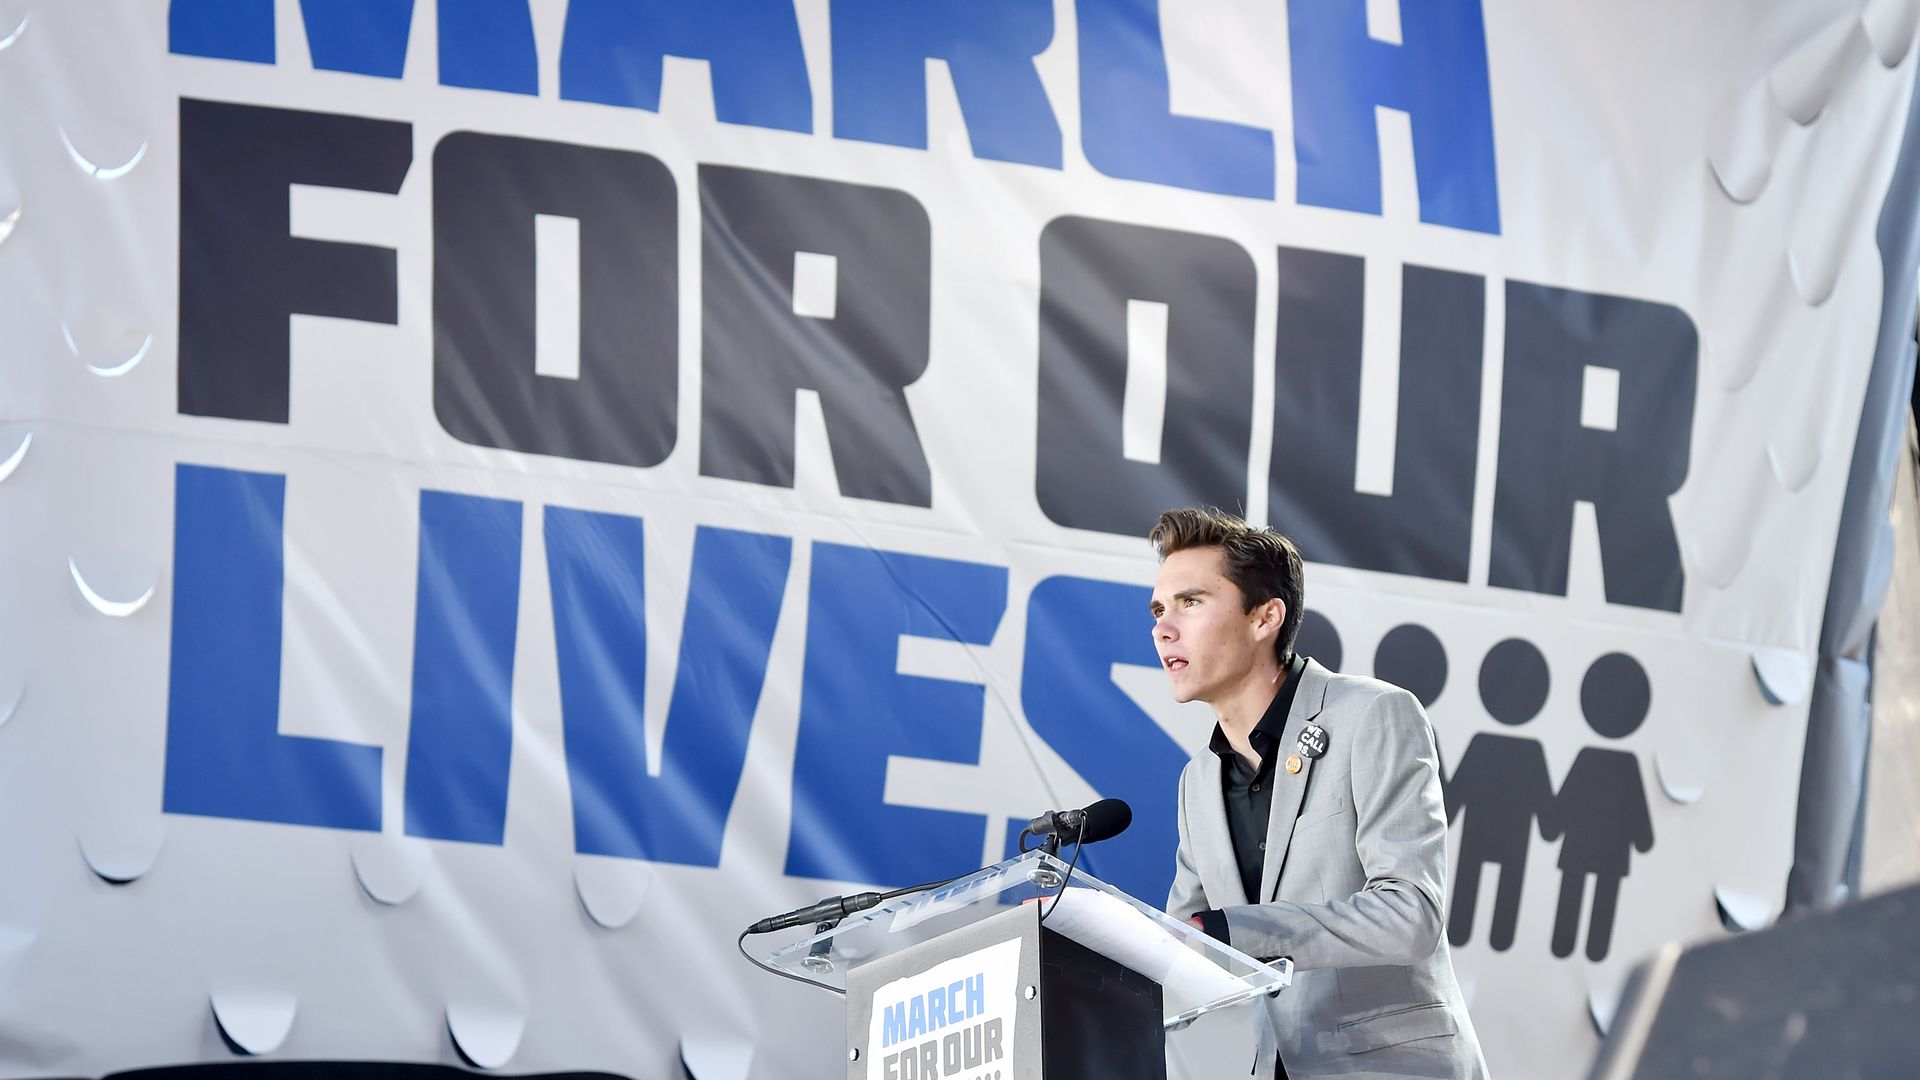  Marjory Stoneman Douglas High School student David Hogg speaks onstage at March For Our Lives on March 24, 2018 in Washington, DC. (Photo by Kevin Mazur/Getty Images for March For Our Lives)